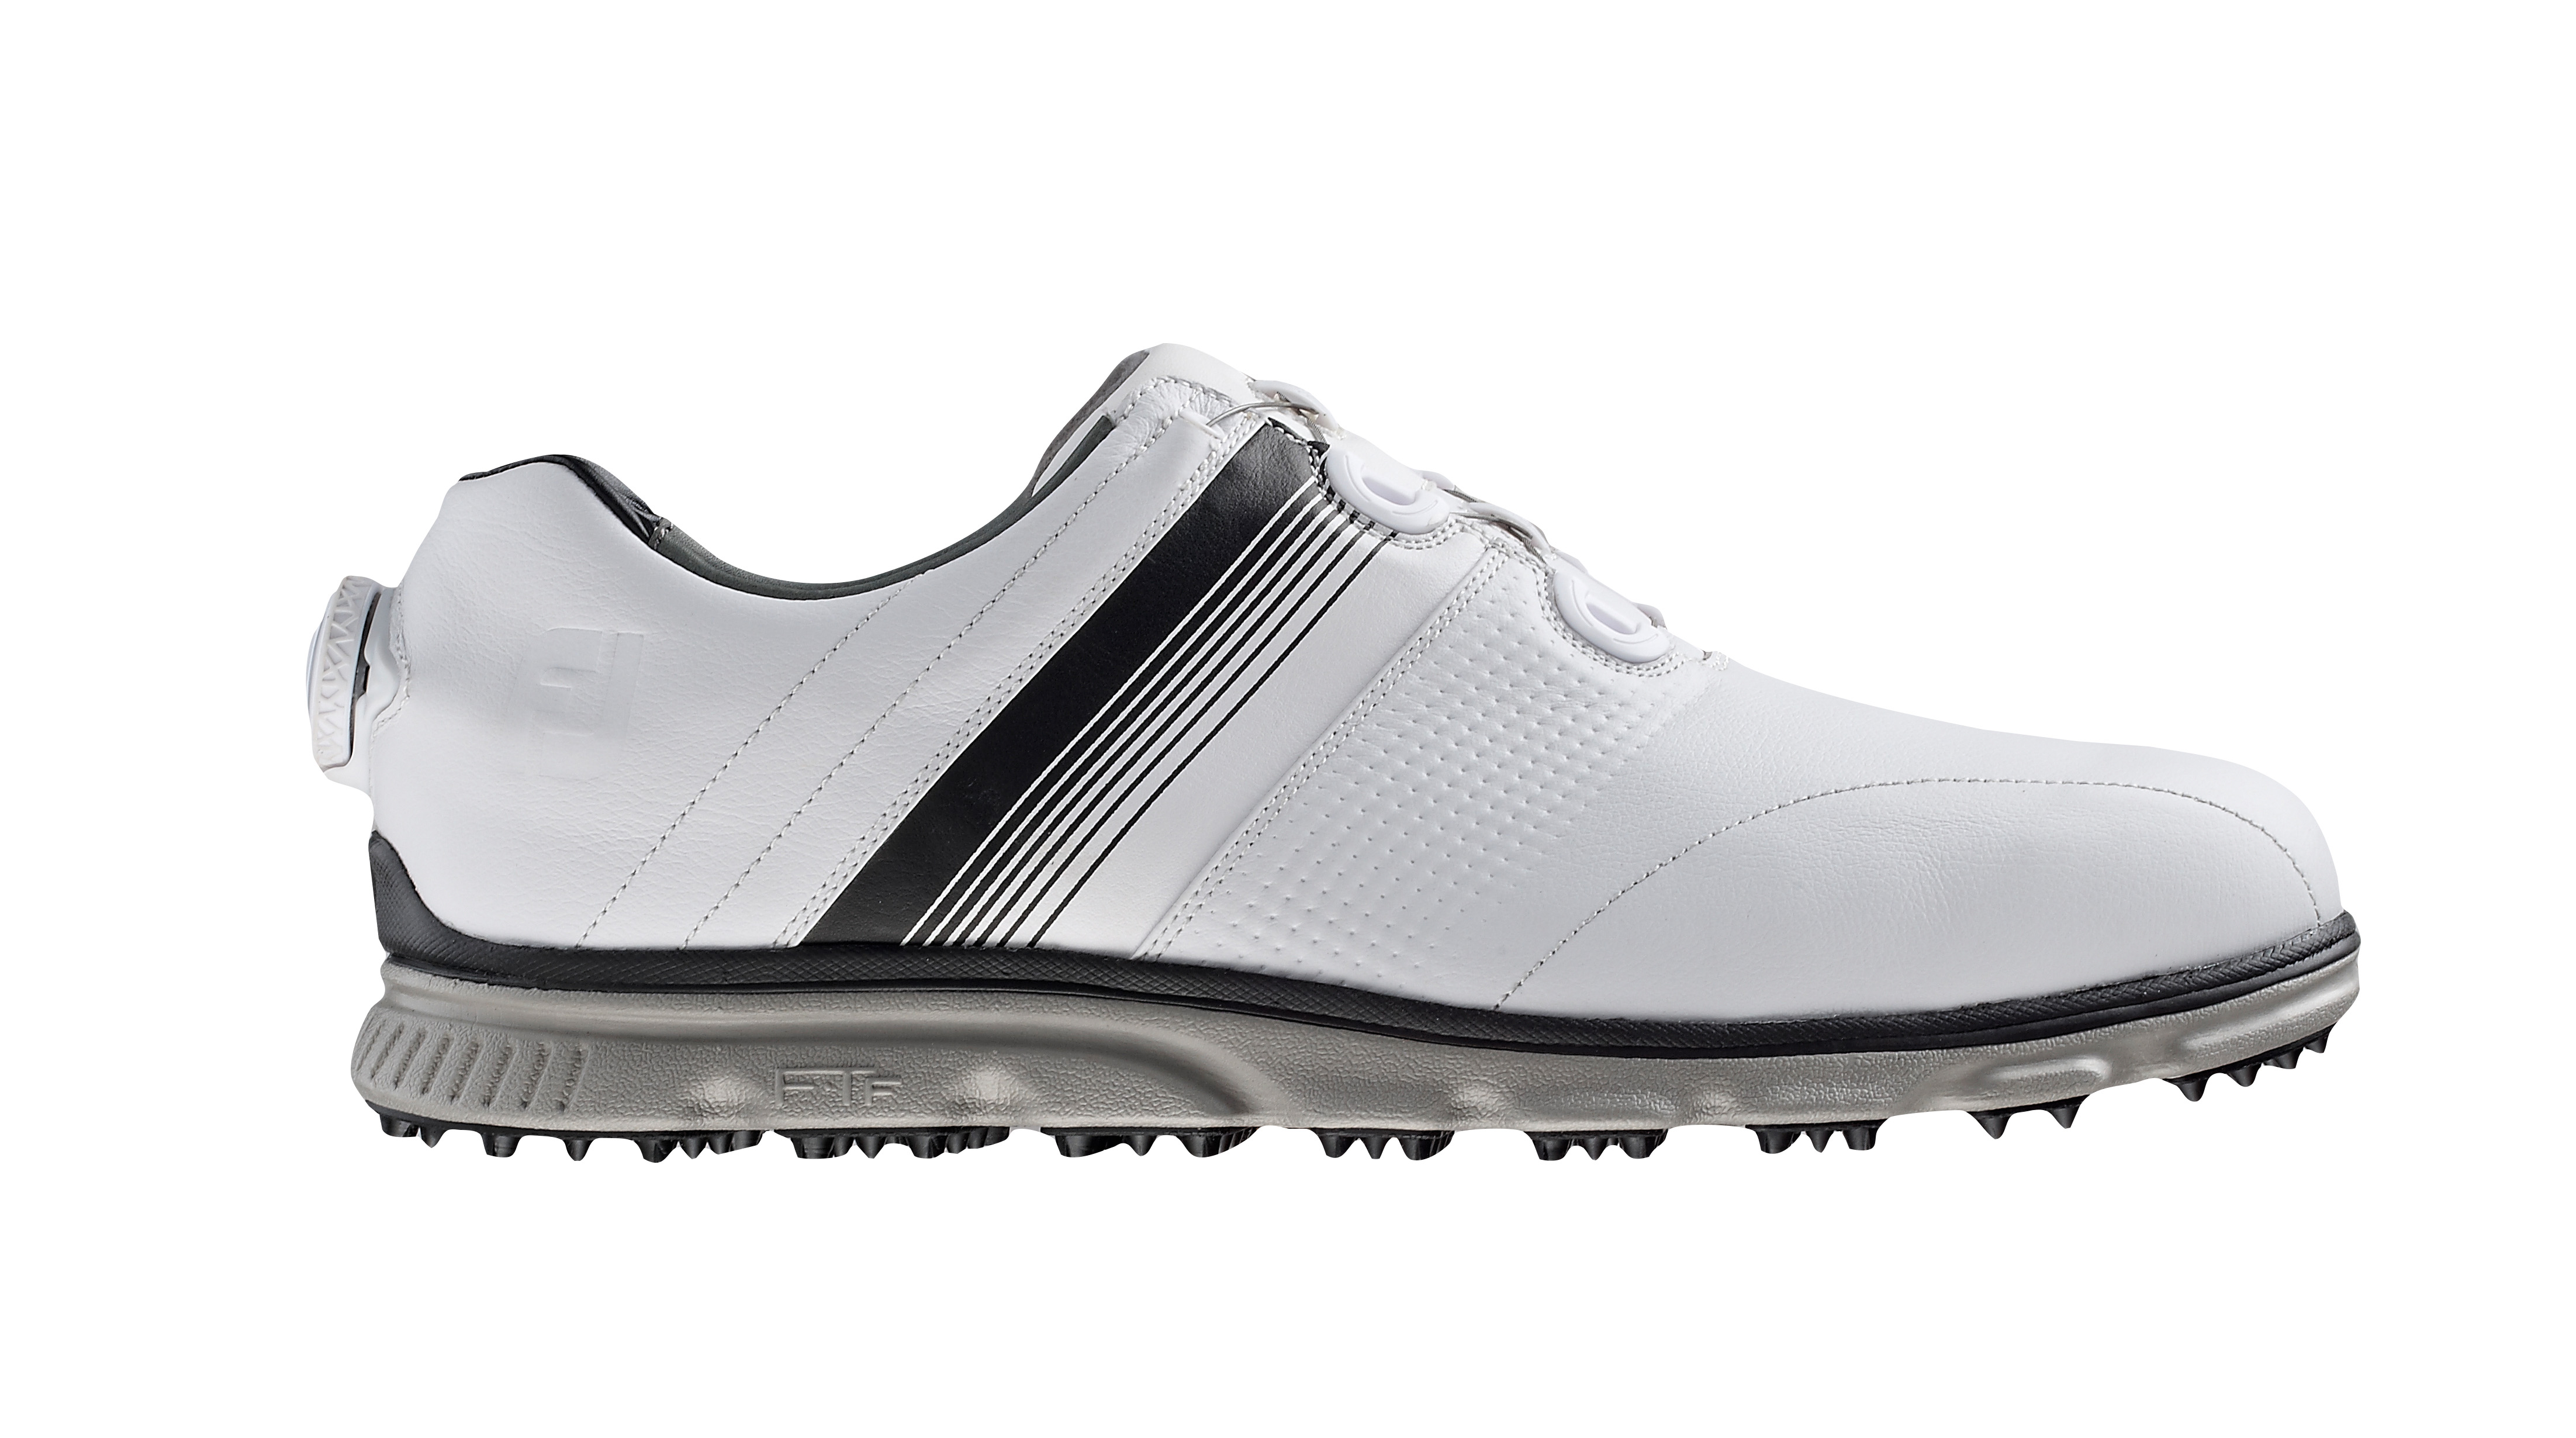 New DryJoys Casual has BOA Closure System for first time